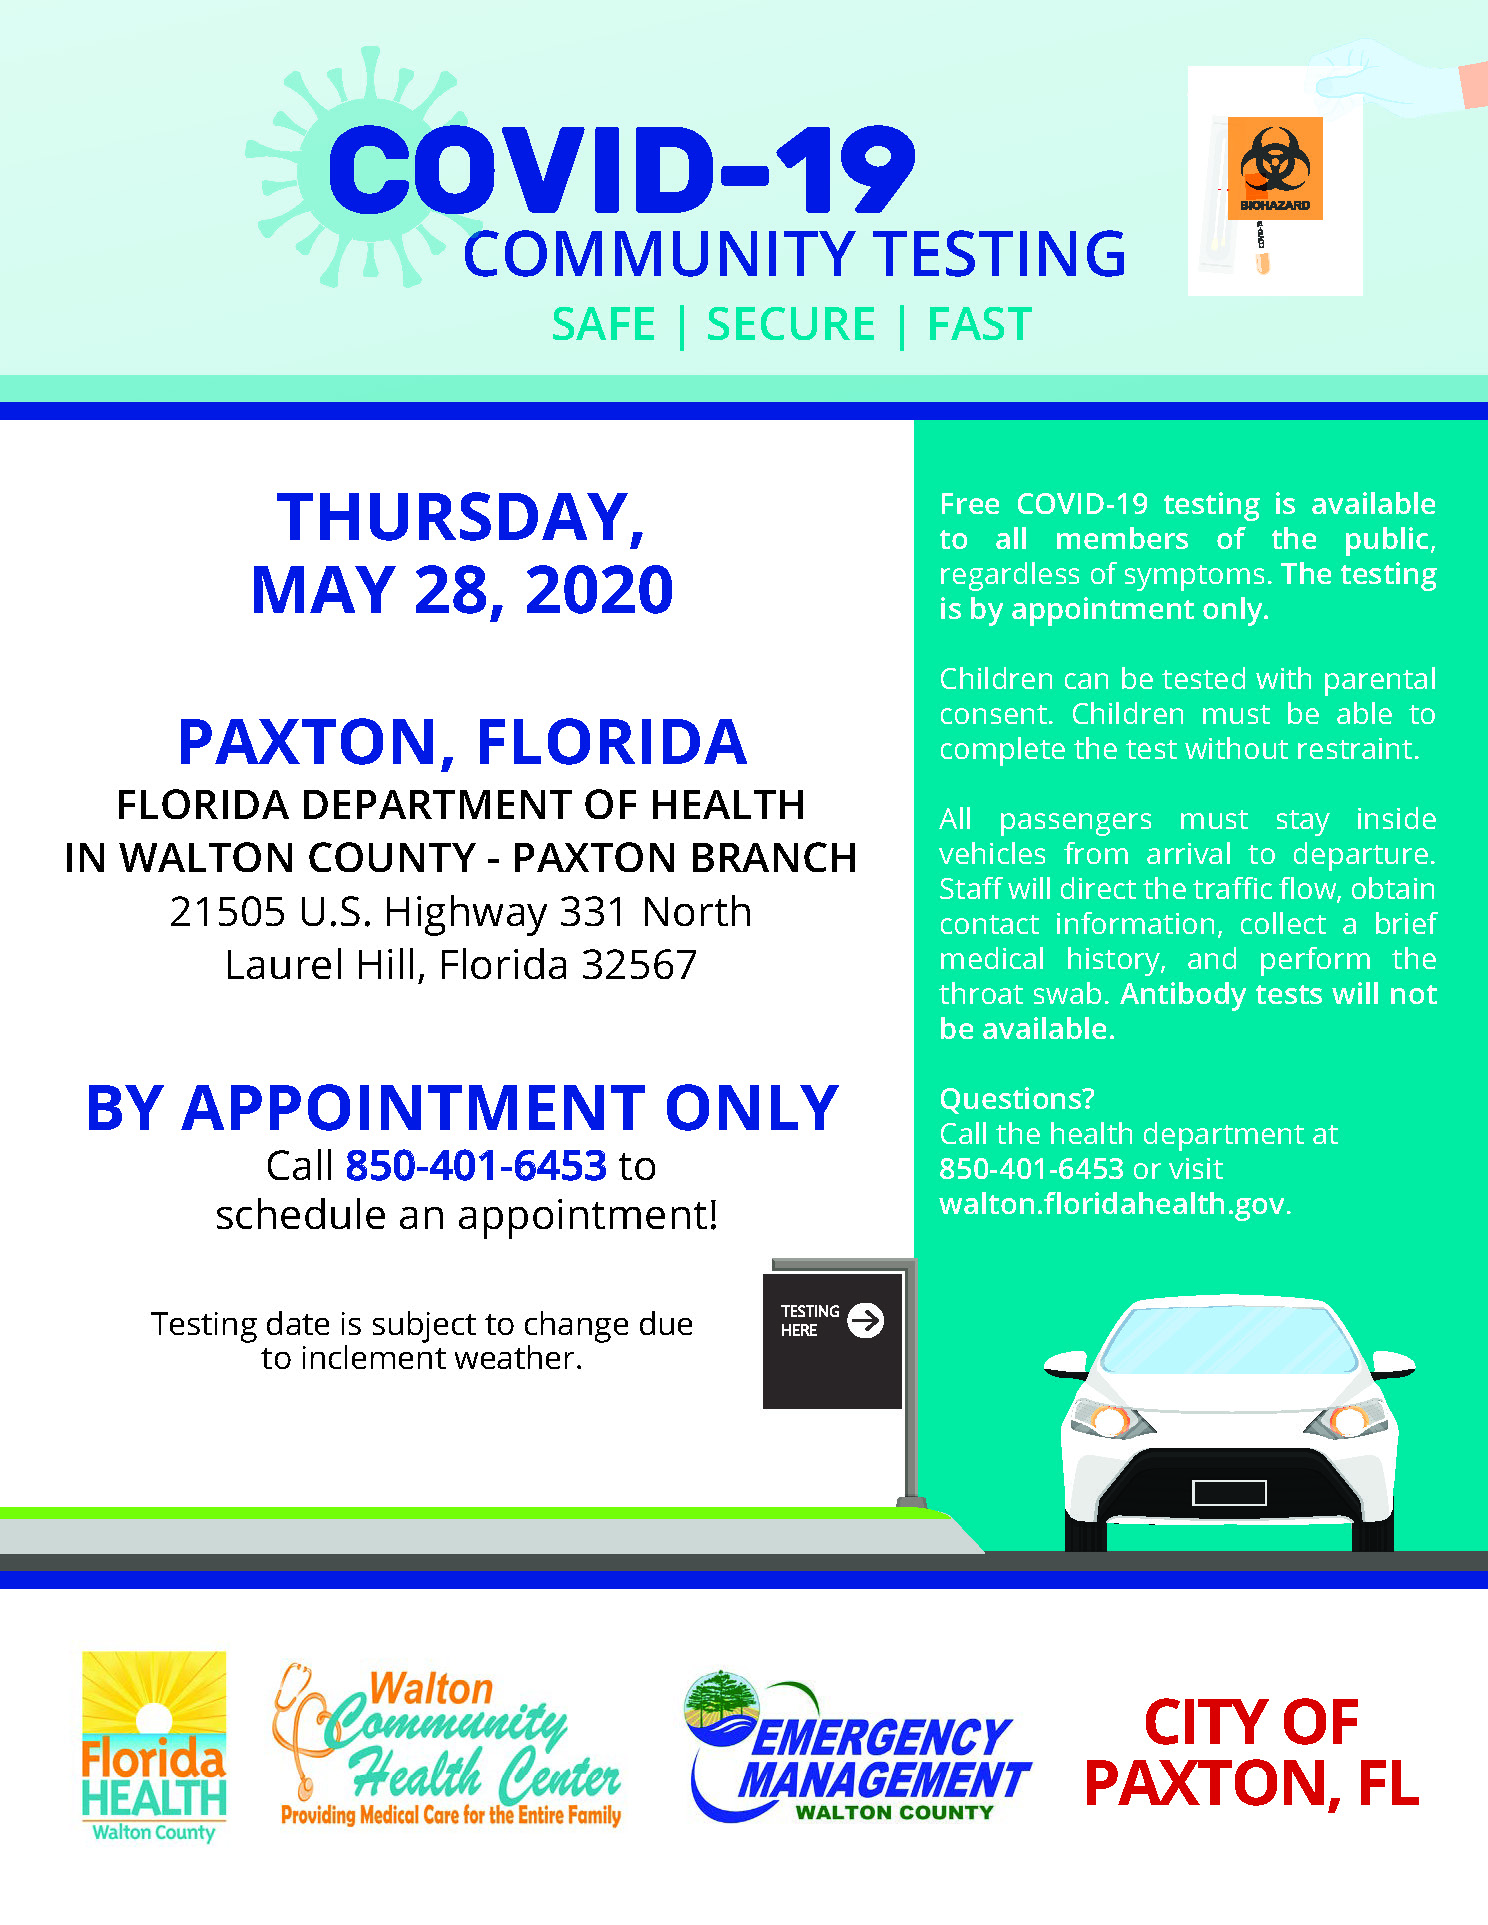 Covid-19 Community Testing Paxton Florida Department Of Health In Walton